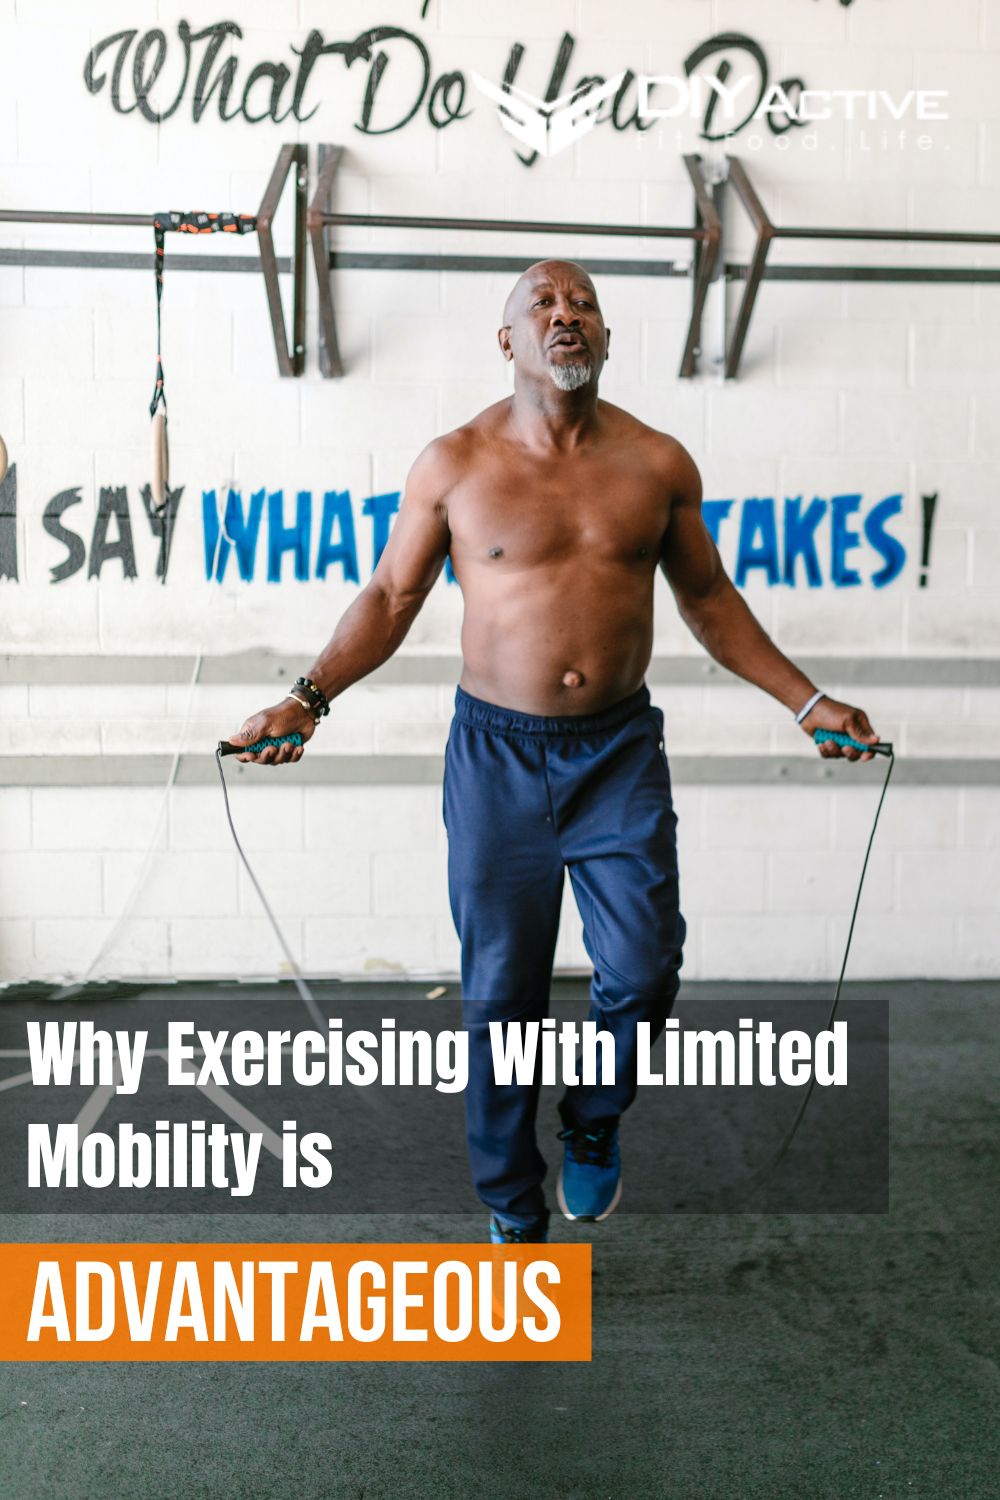 Why Exercising With Limited Mobility is Advantageous